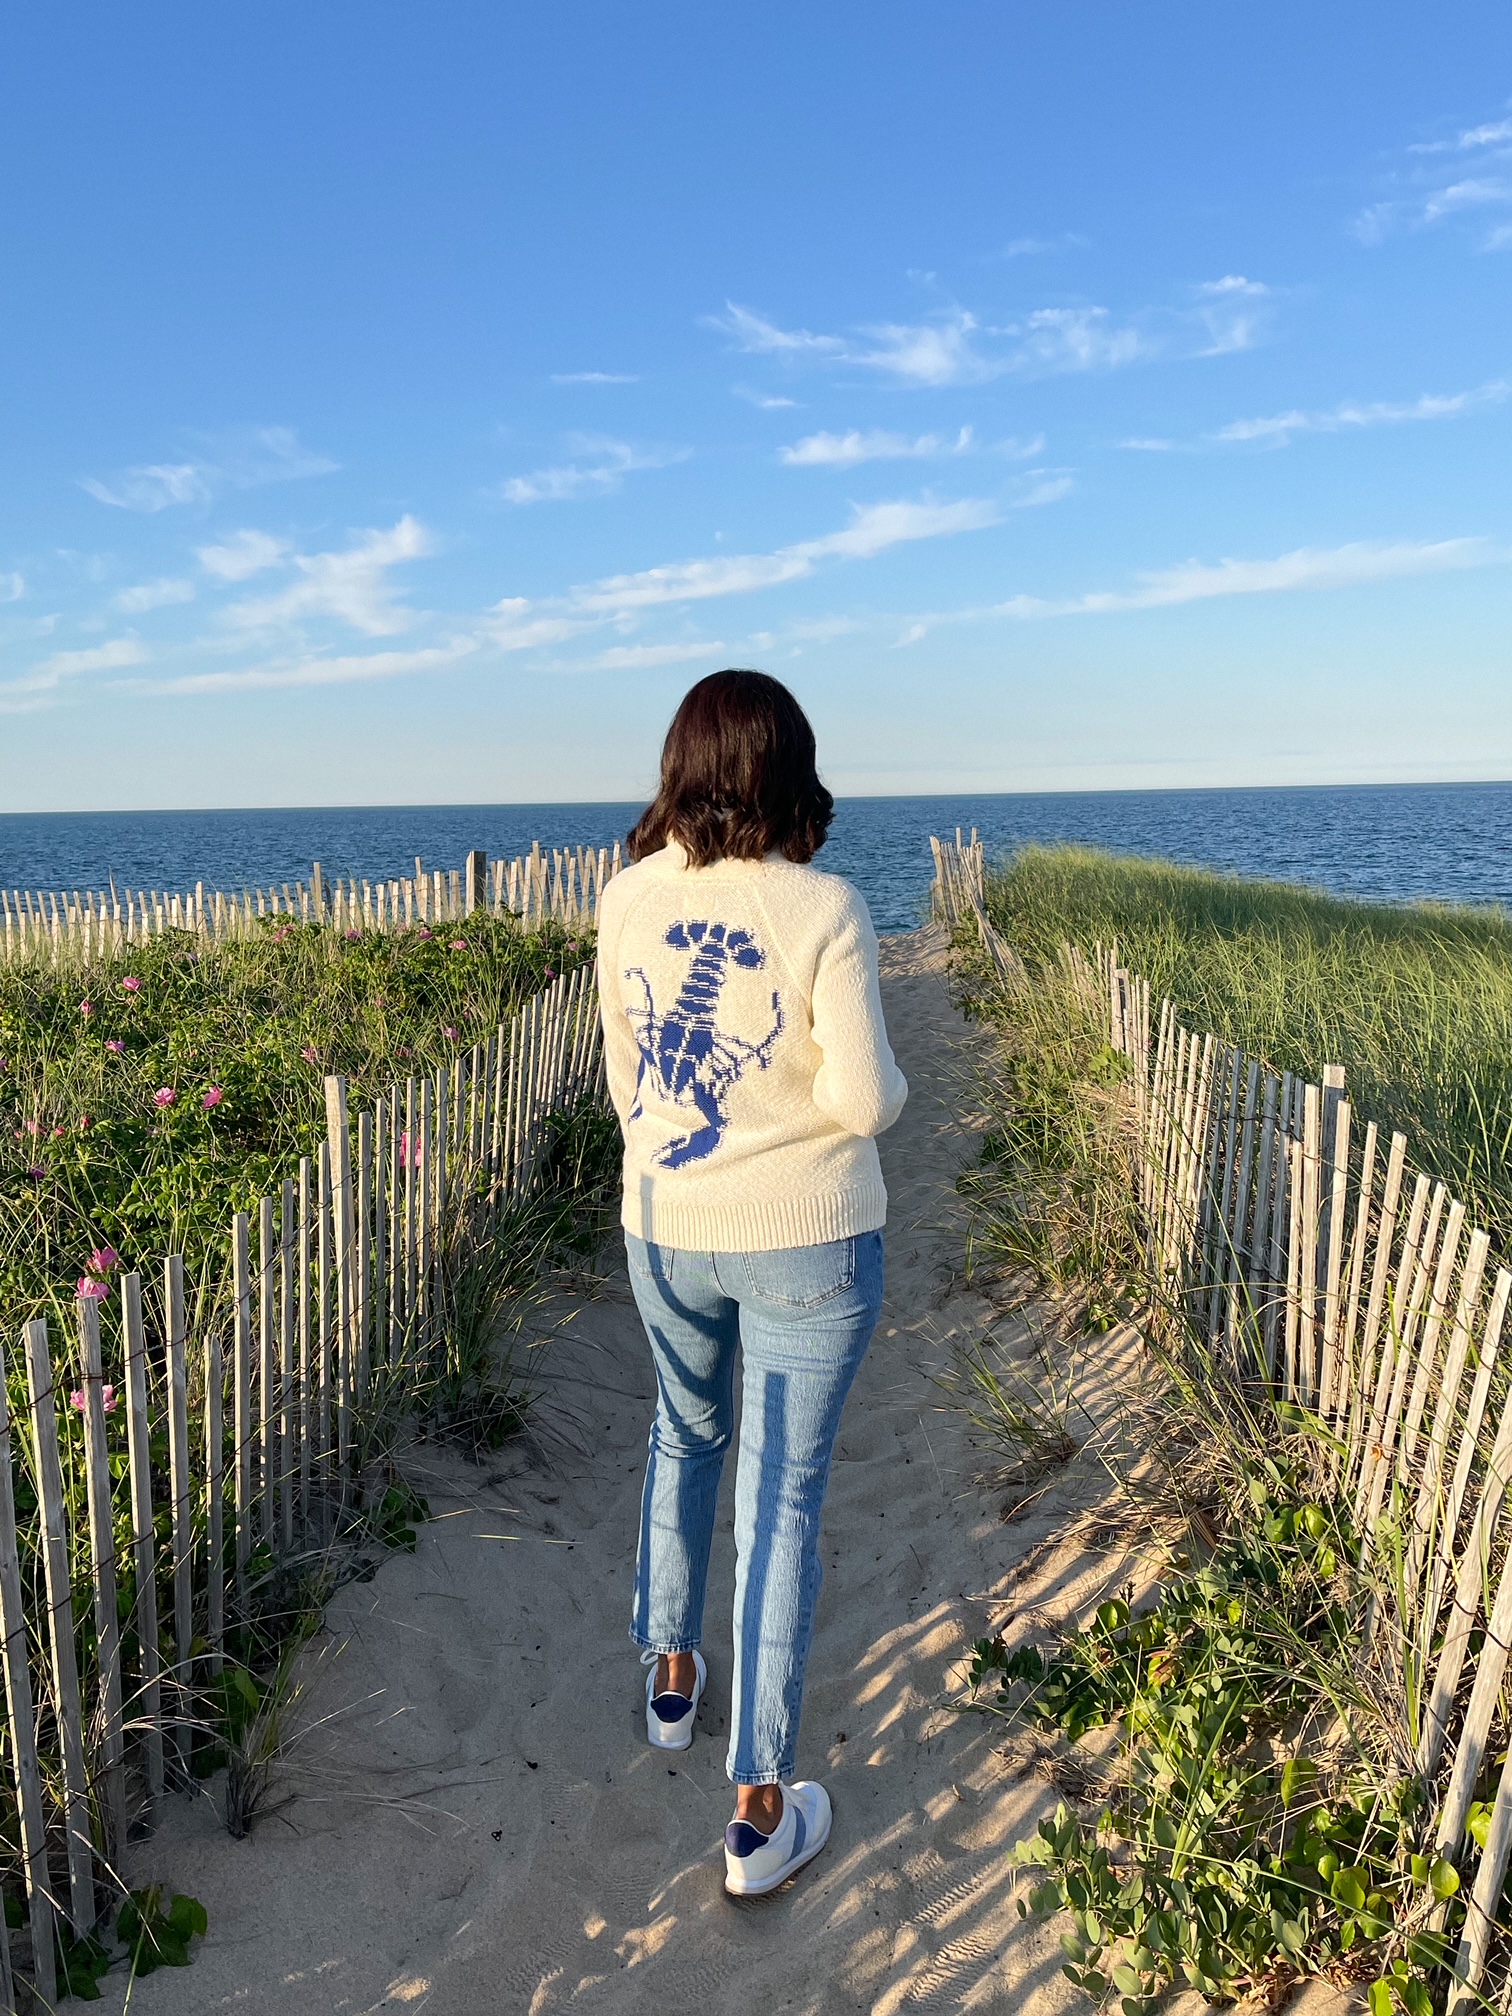 Desiree Leone of Beautifully Seaside is featuring 12 outfit ideas in, My Nantucket Summer Packing List 2023, including this lobster cardigan sweater.